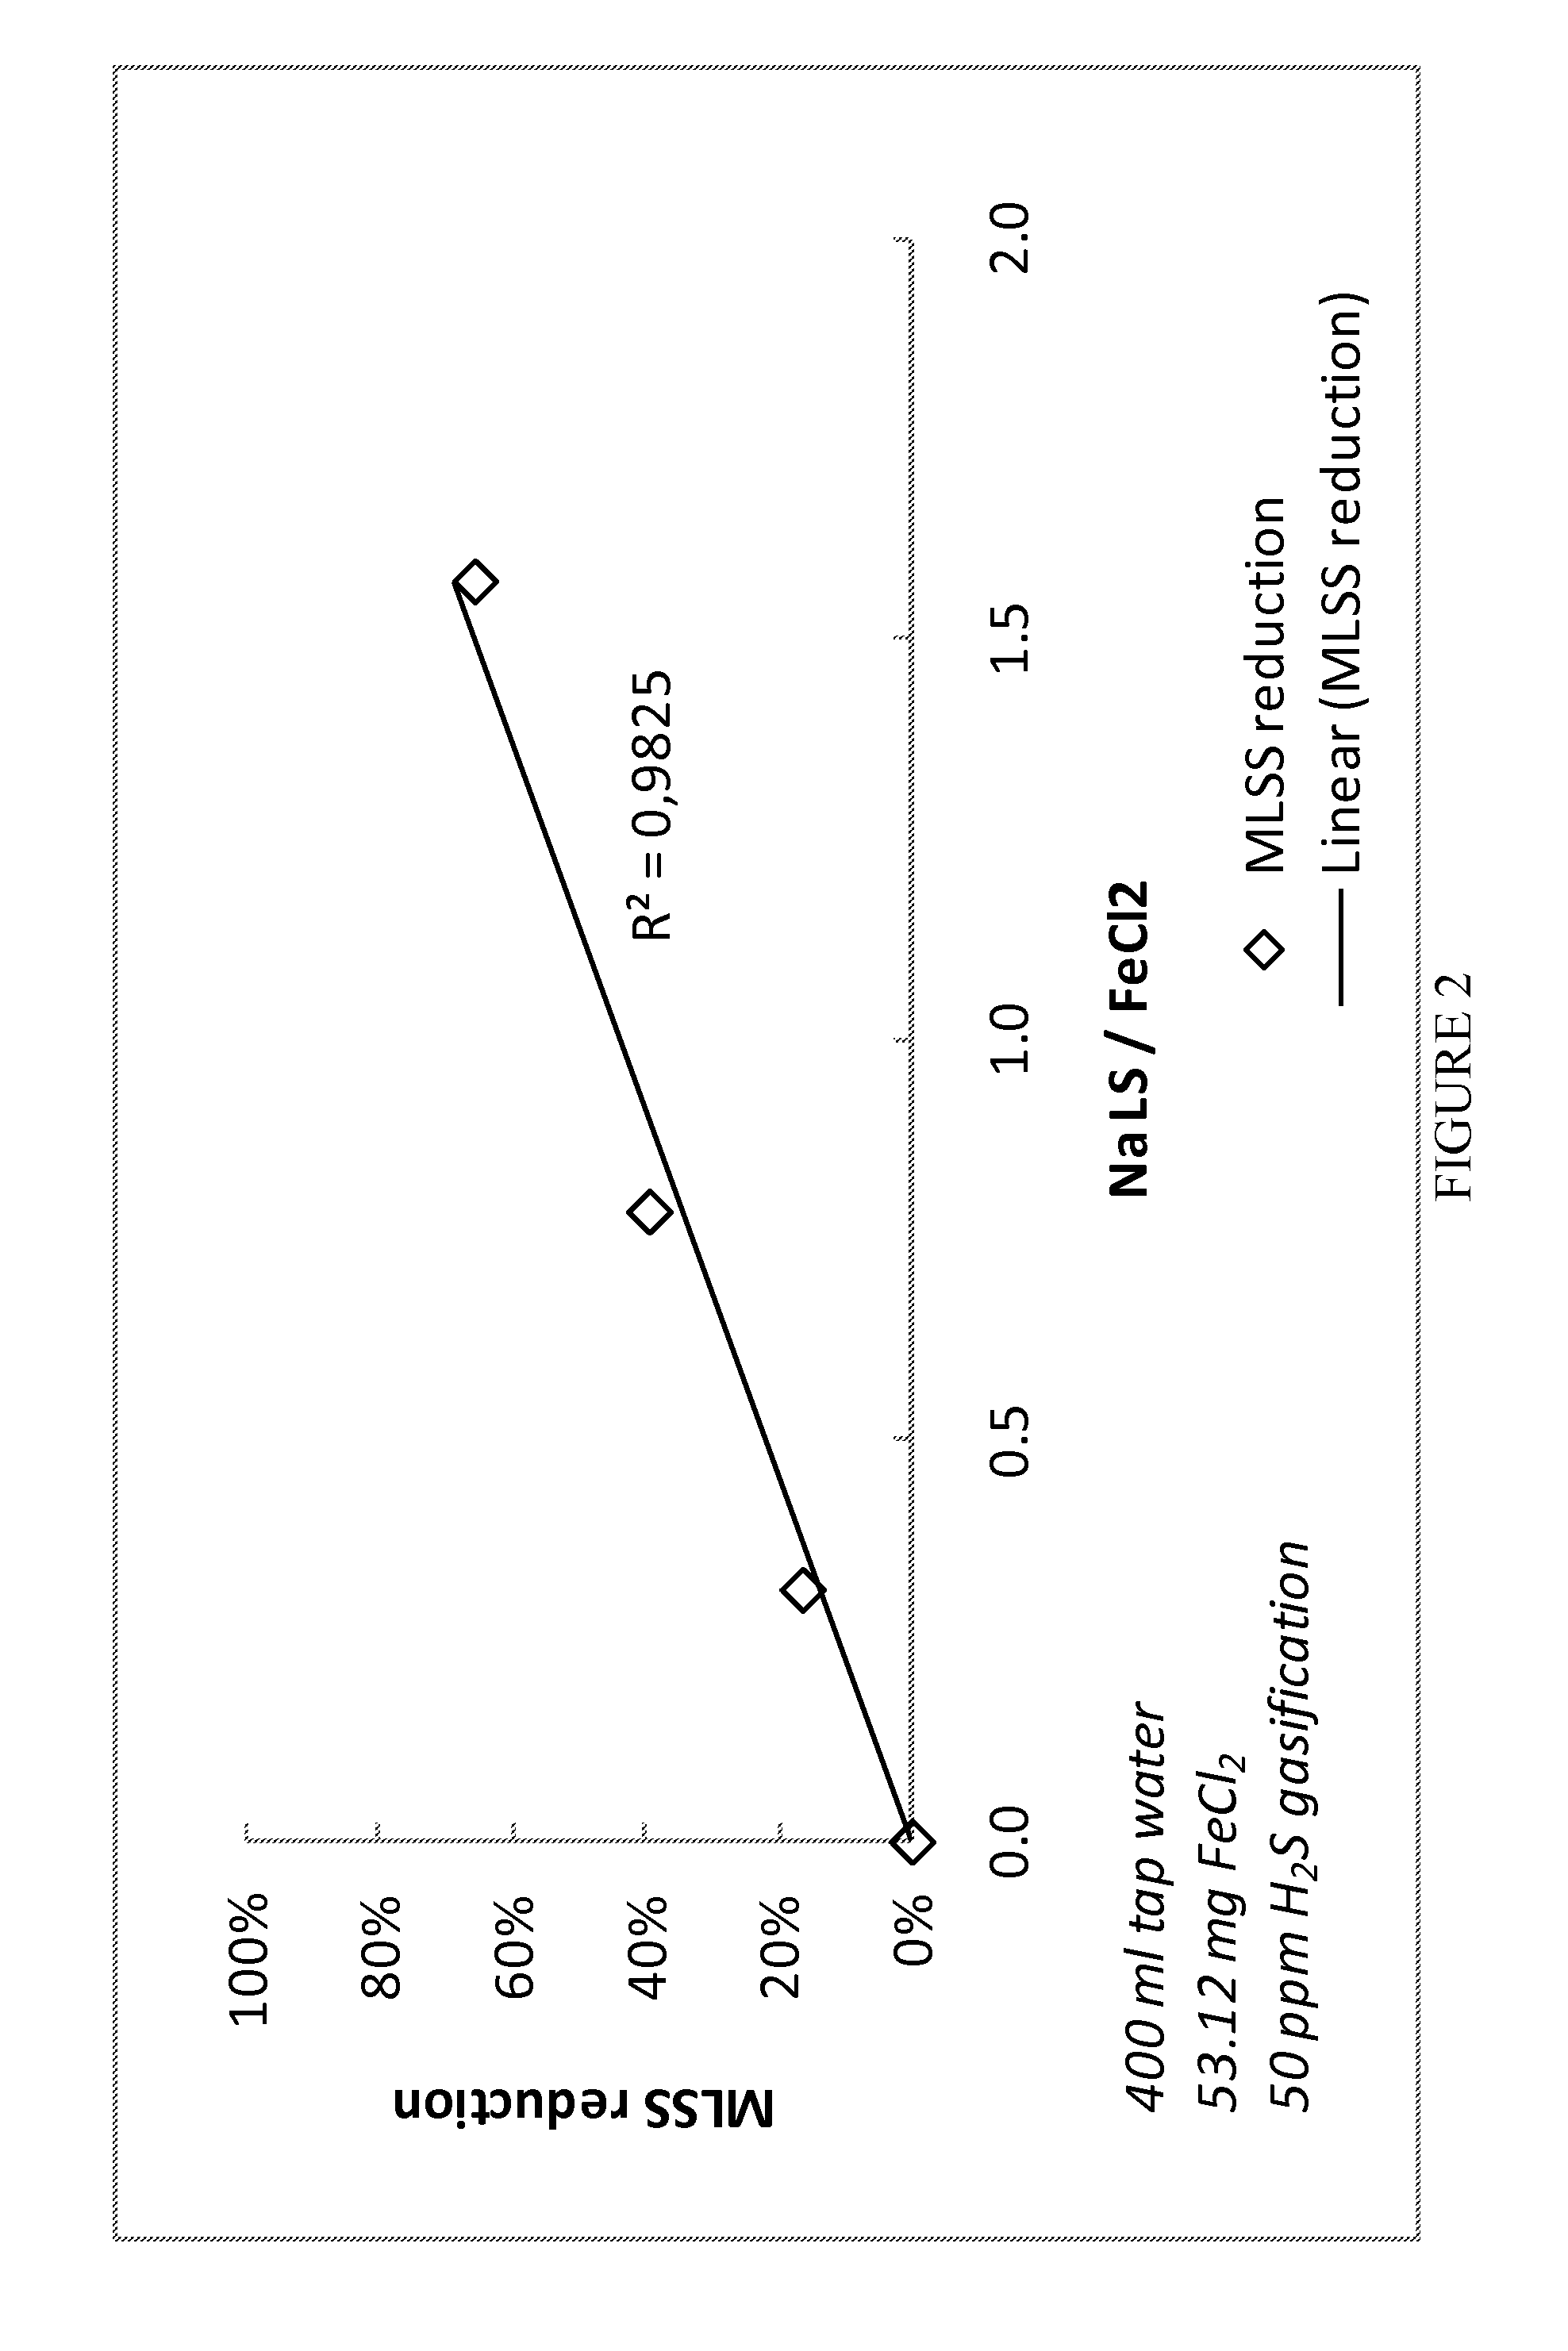 Method to support an emission-free and deposit-free transport of sulphide in sewer systems to waste water treatment plants and agent for use therein